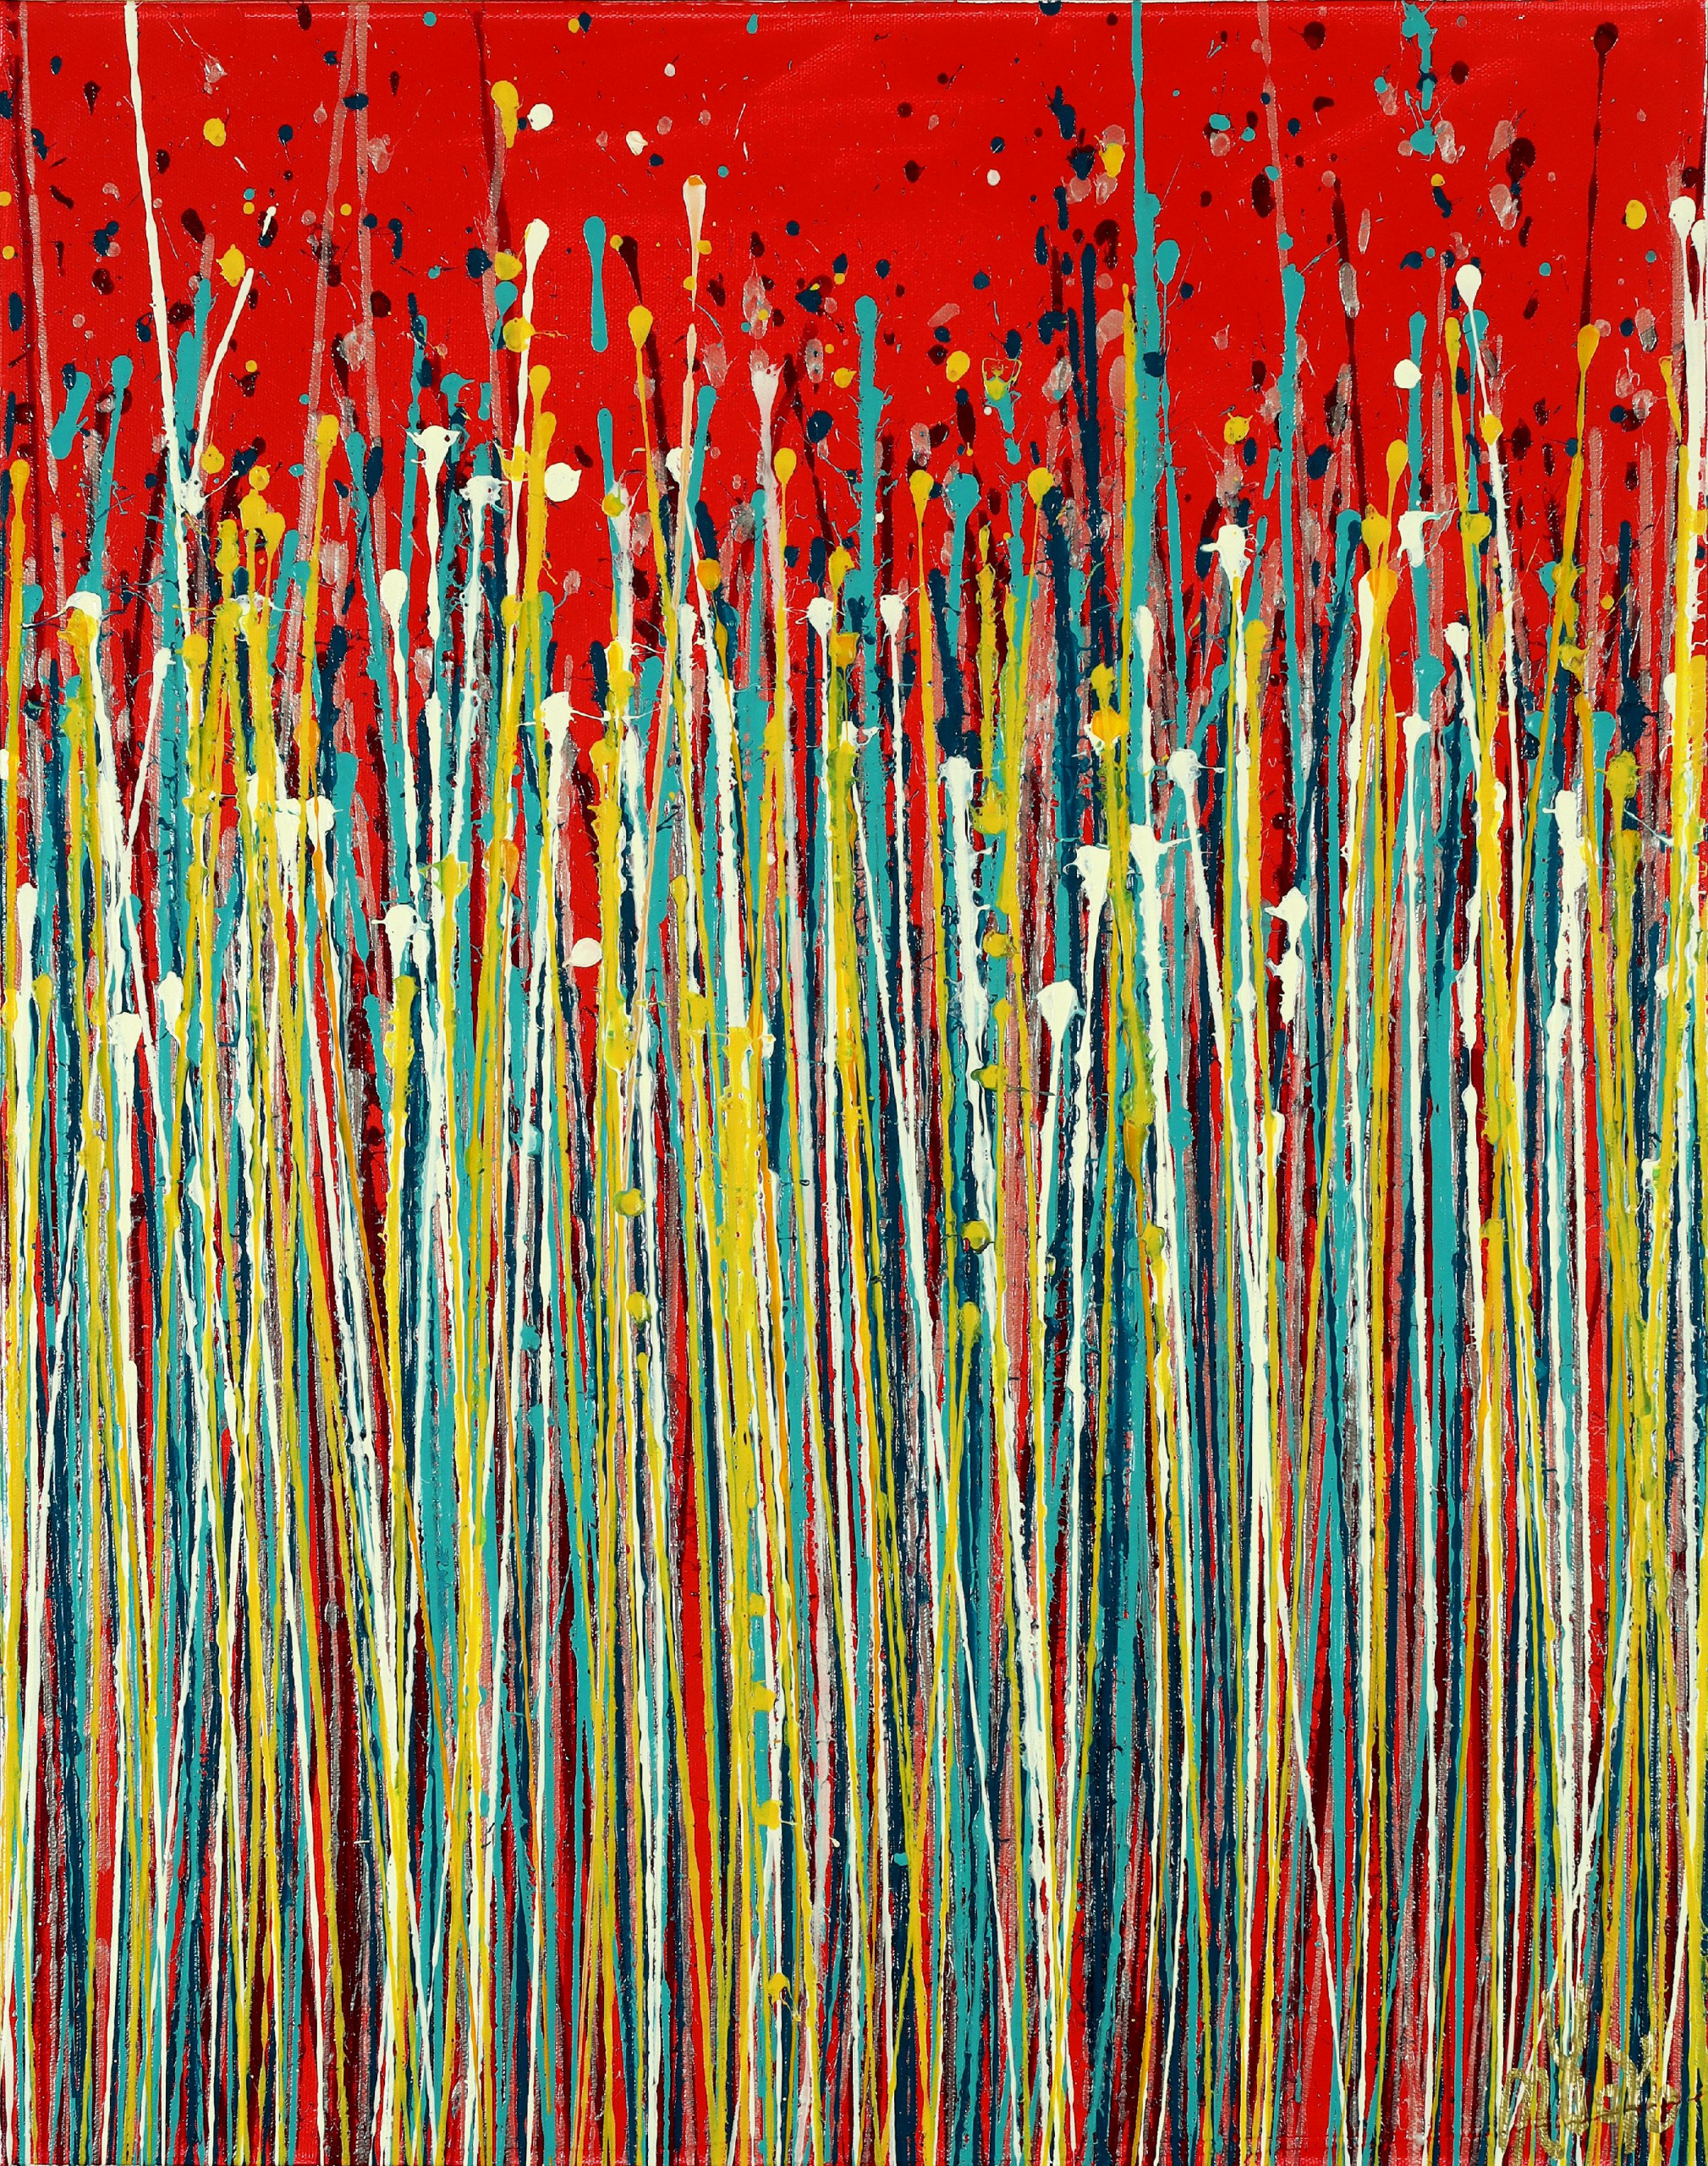 Strange Spectra 6 (over red) (2022) / Triptych / CANVAS 3 OF 3